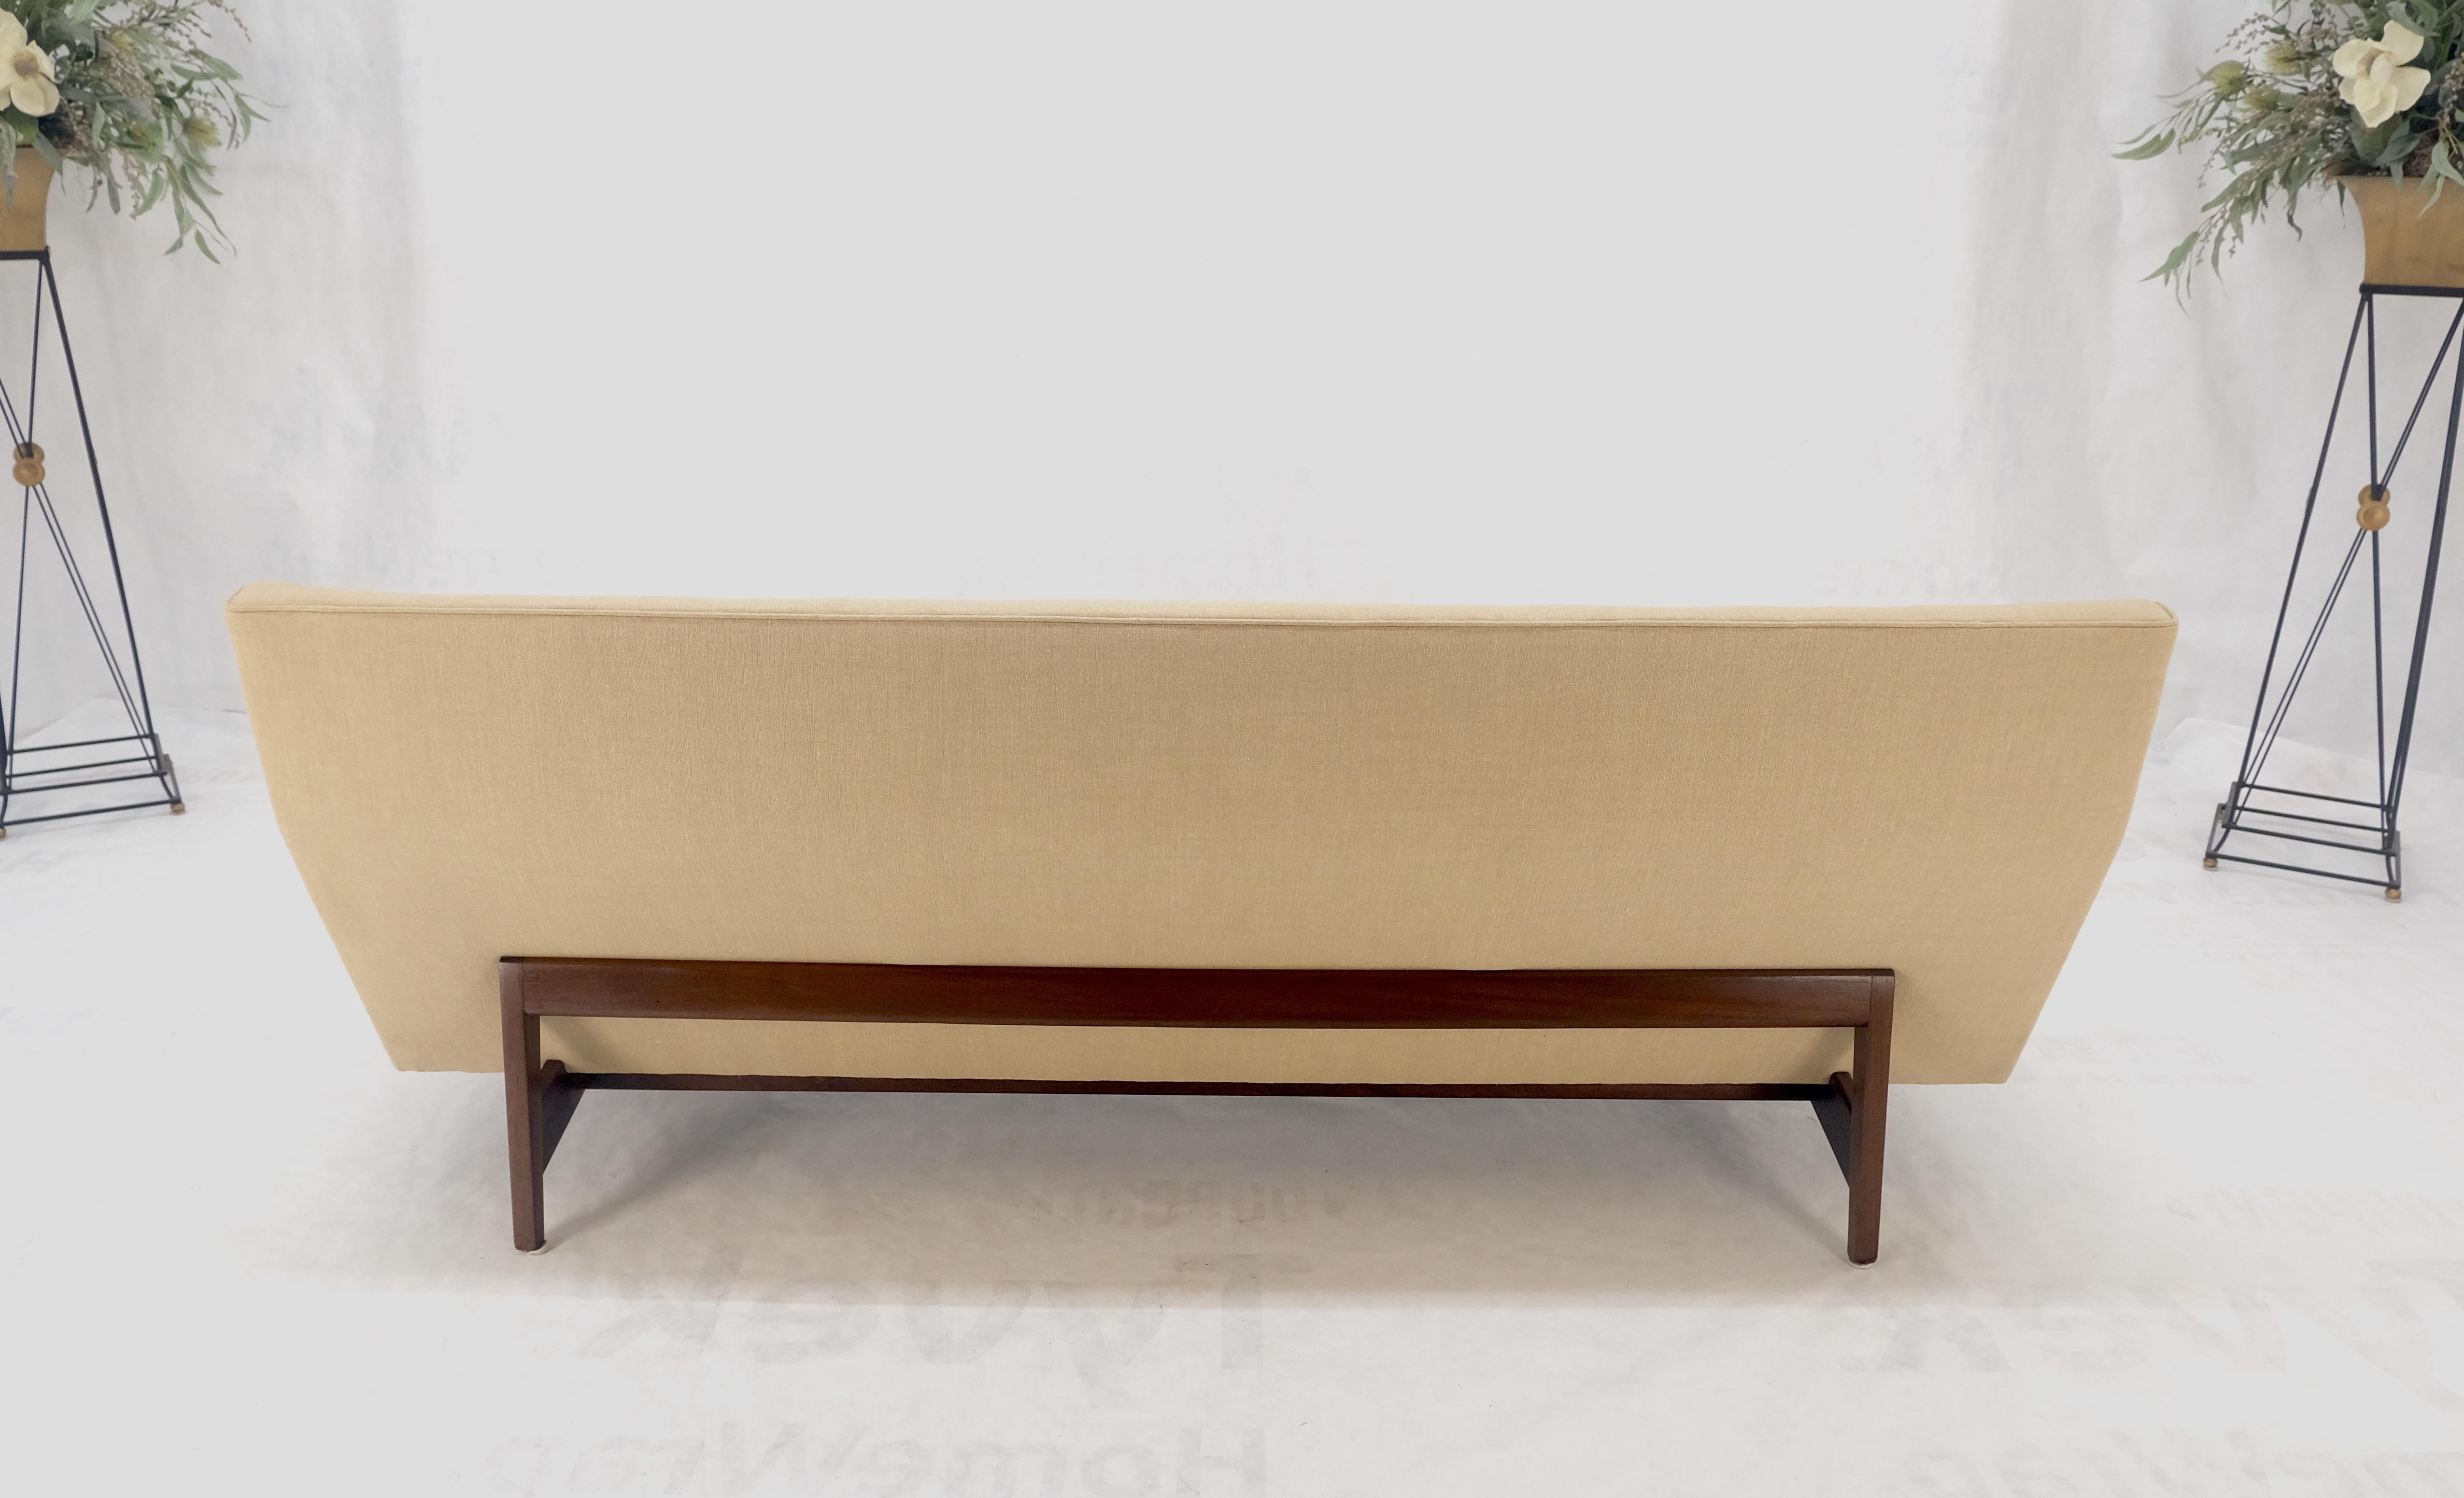 Jens Risom NEW Beige Linen Upholstery Oiled Walnut Frame c1960s Sofa Couch MINT! For Sale 9